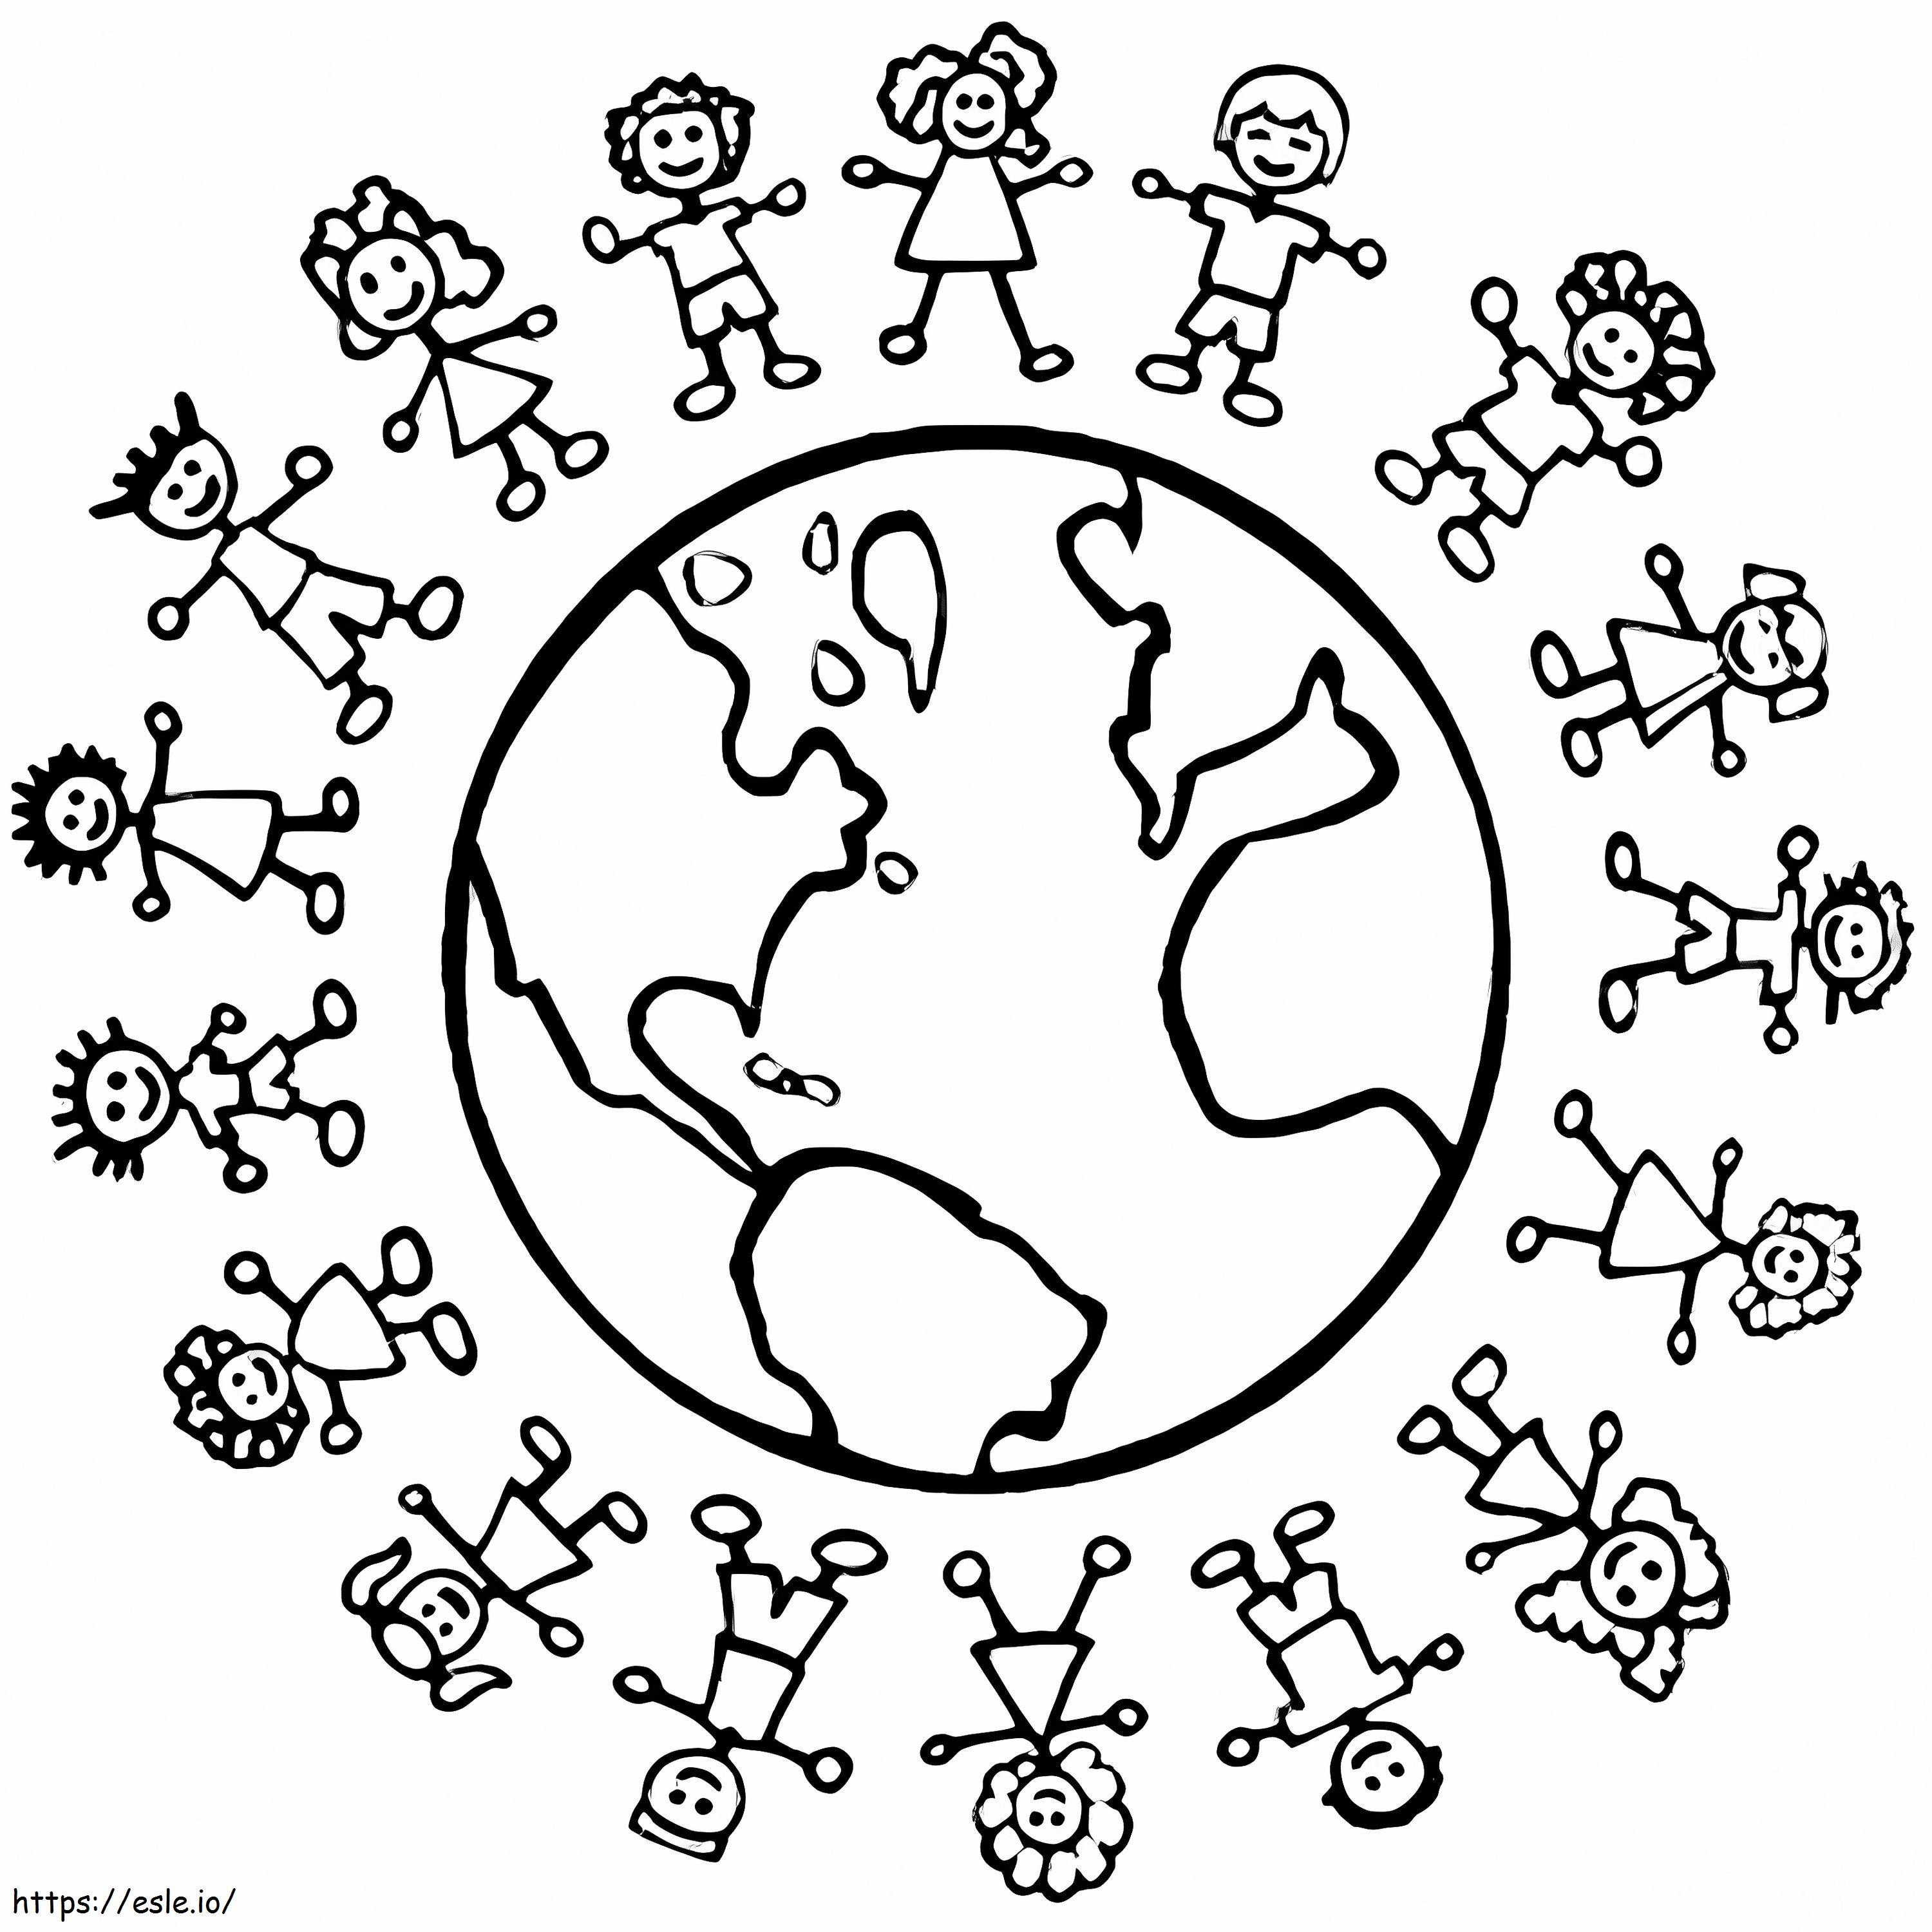 printable-world-thinking-day-coloring-page